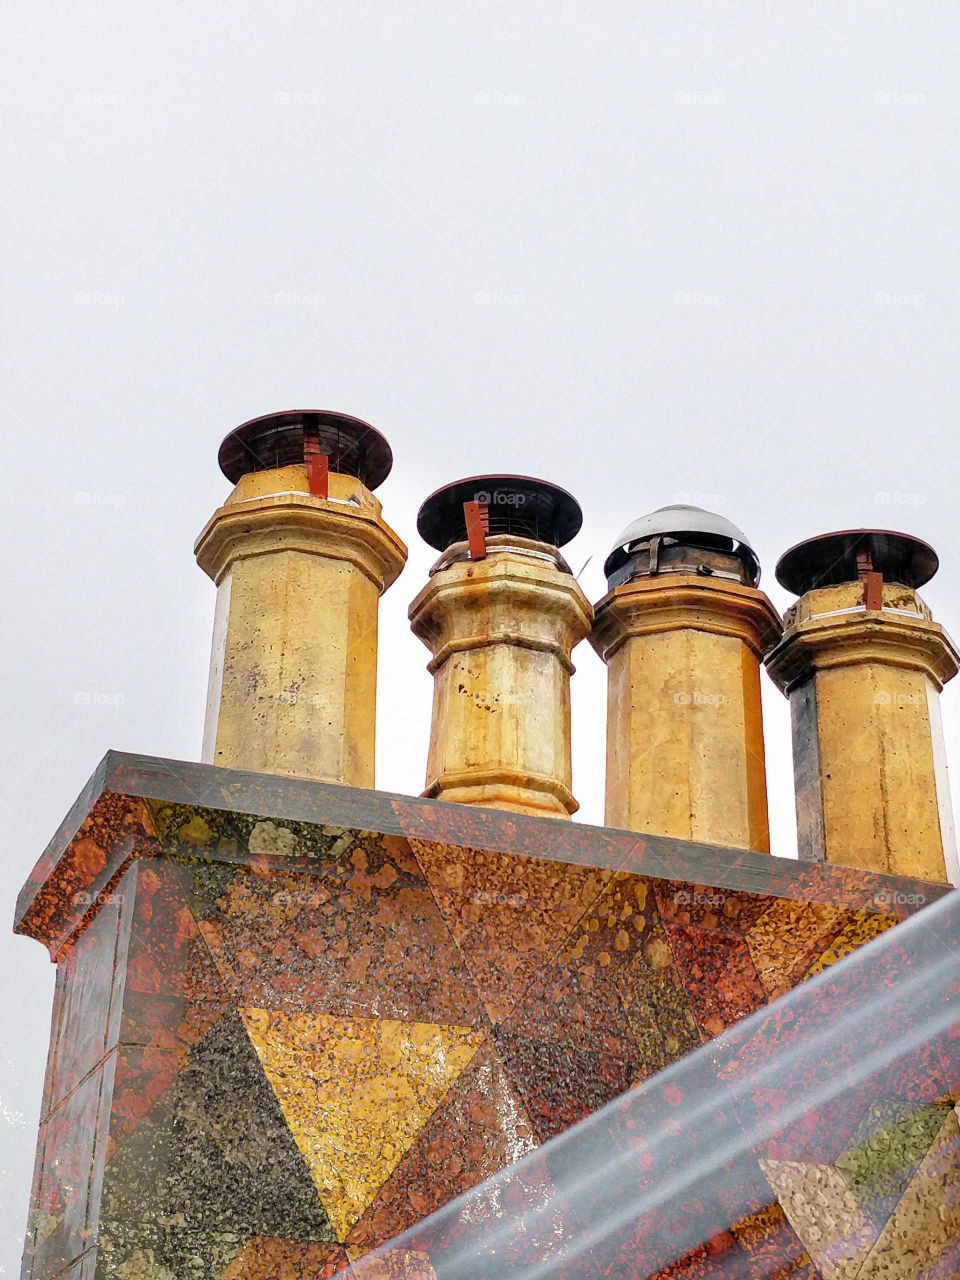 chimneys in Scotland with some biomarble double exposure